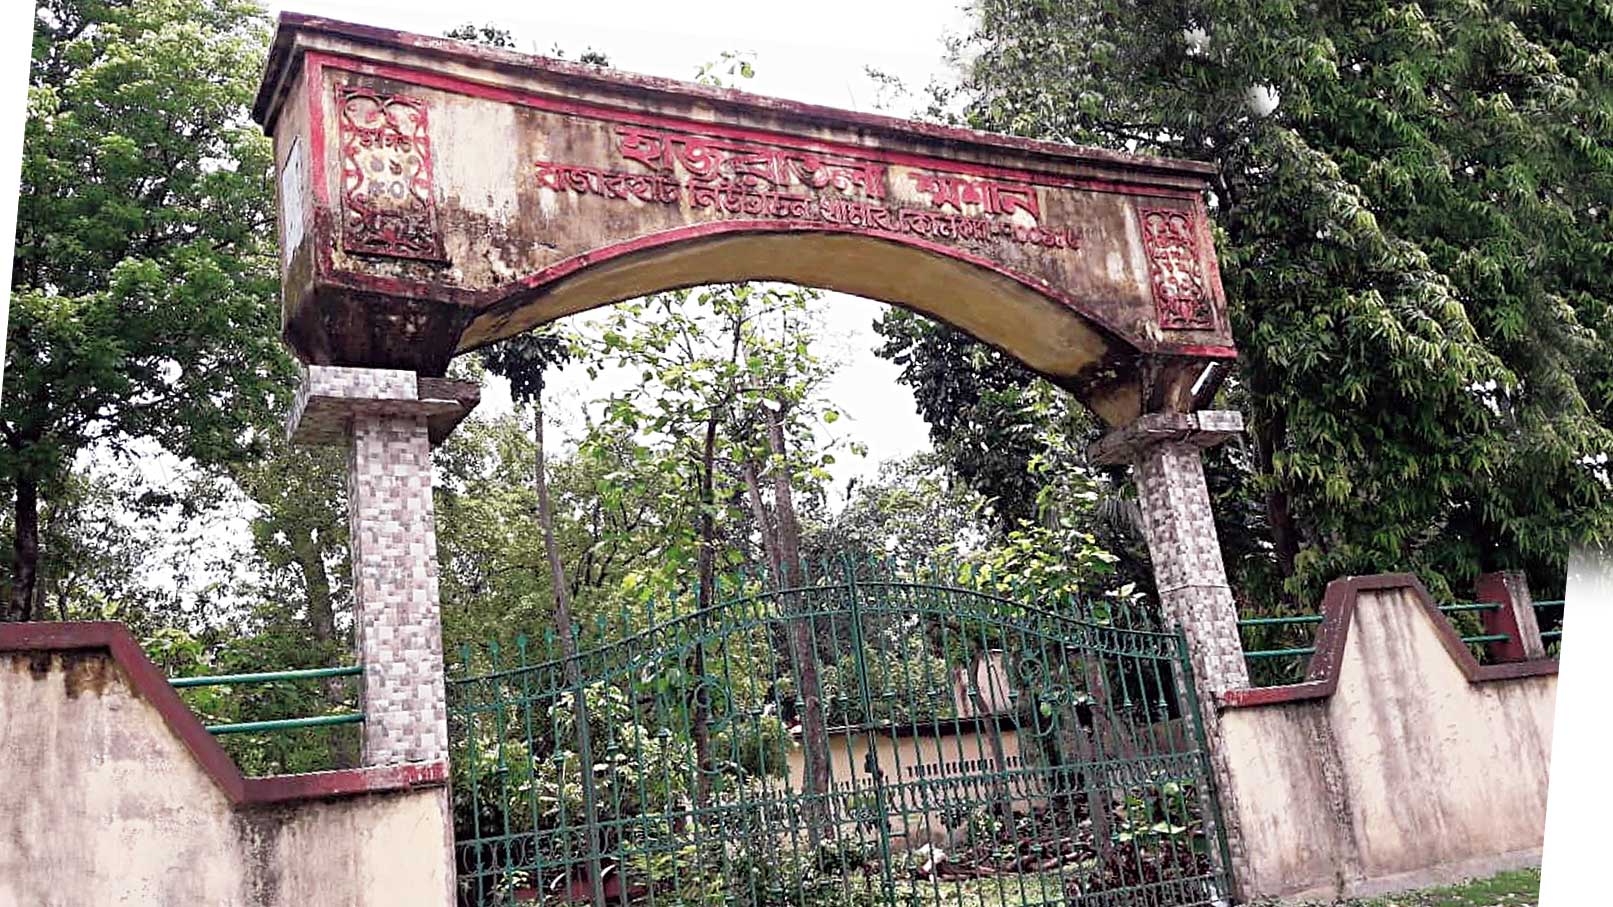 Coming up: The only crematory in the Salt Lake-New Town vicinity is Hazratala Burning Ghat in Rajarhat. But it is an archaic one, using wooden pyres. MLA Tapash Chatterjee wants to build an electric furnace on the four-bigha private land. Work has not started yet.